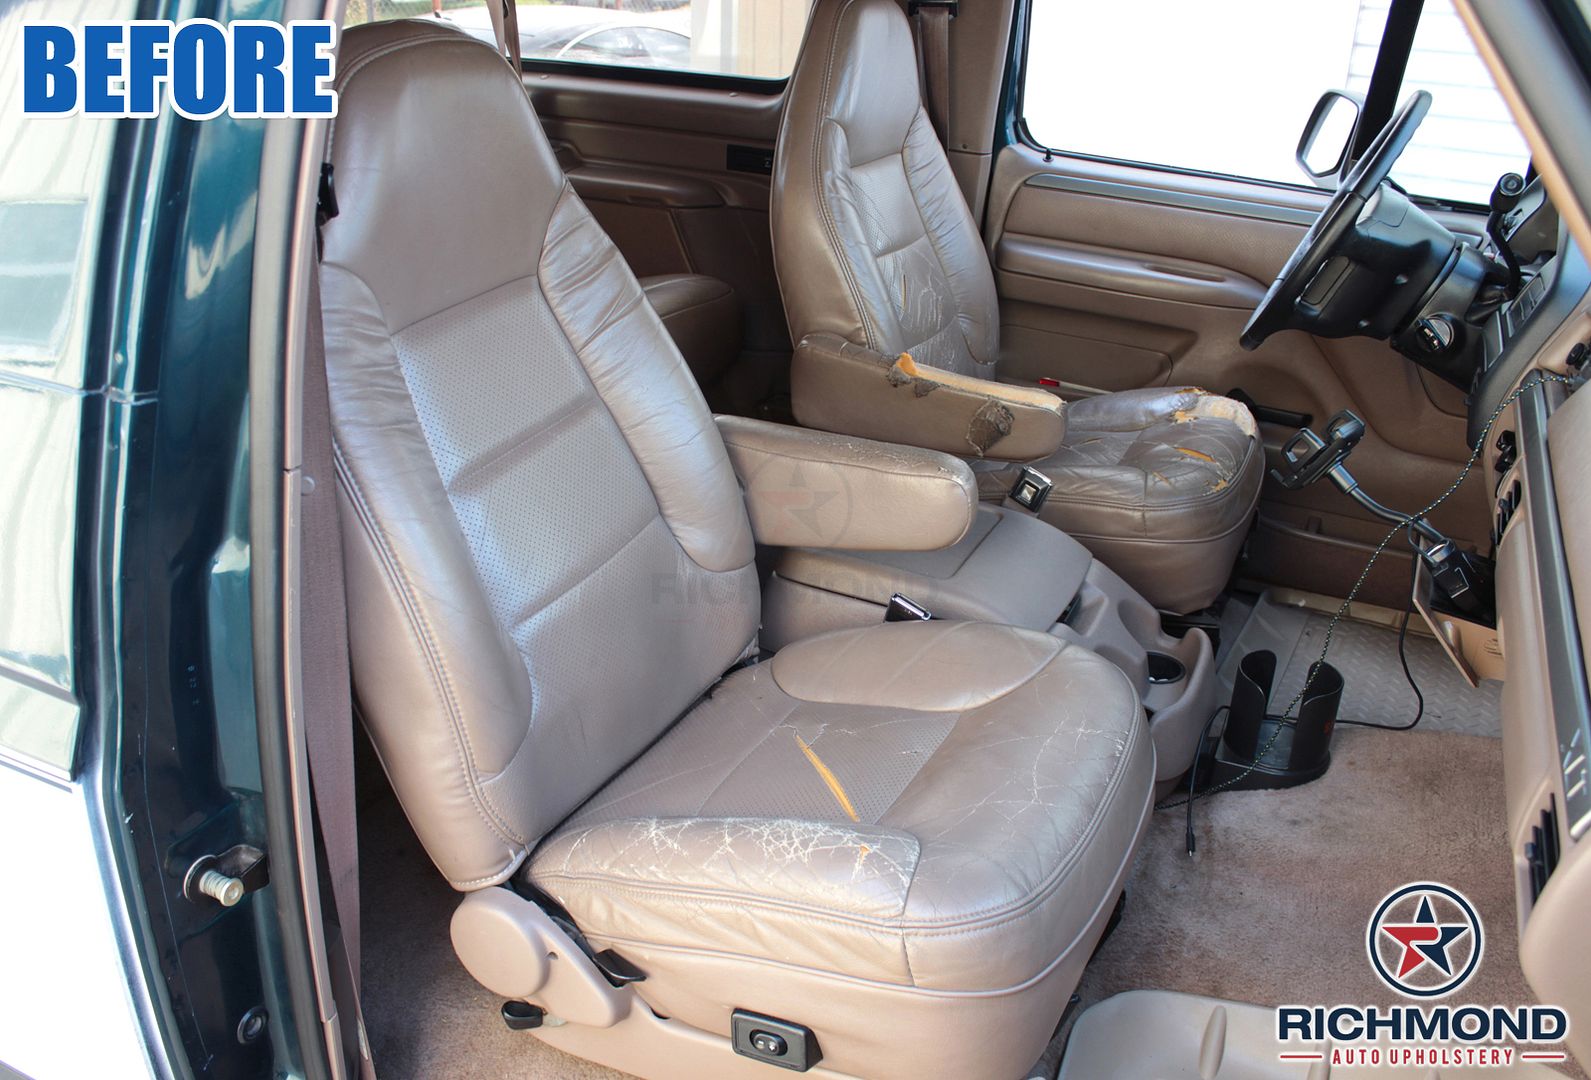 Details About 92 96 Bronco Eddie Bauer Passenger Bottom Replacement Leather Seat Cover Gray